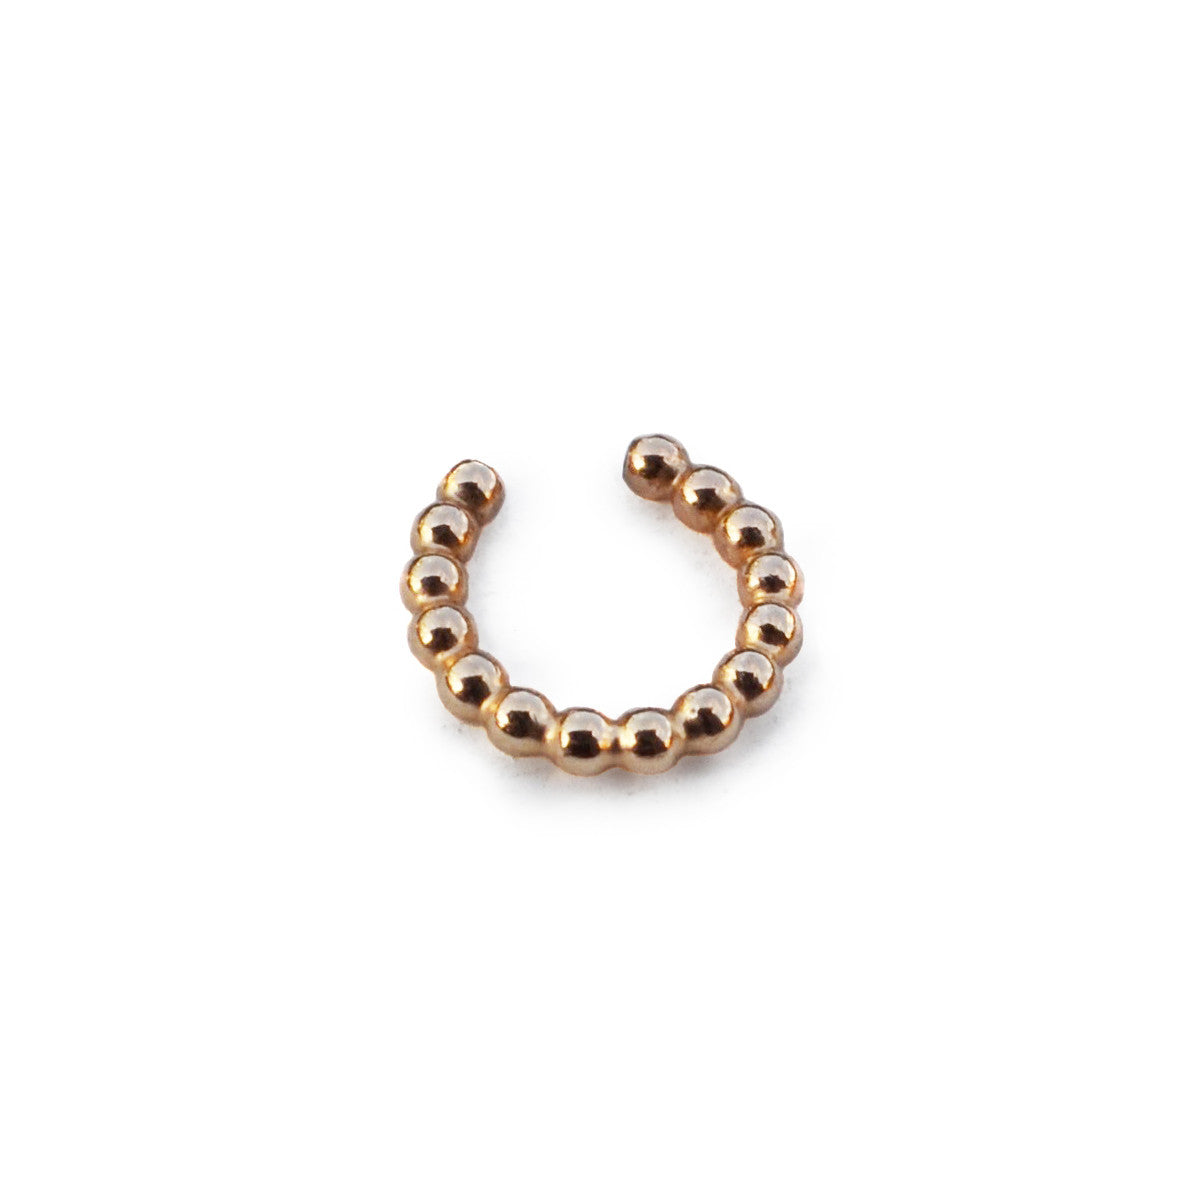 Beaded Ear Cuff, Gold, Rose Gold, or Silver